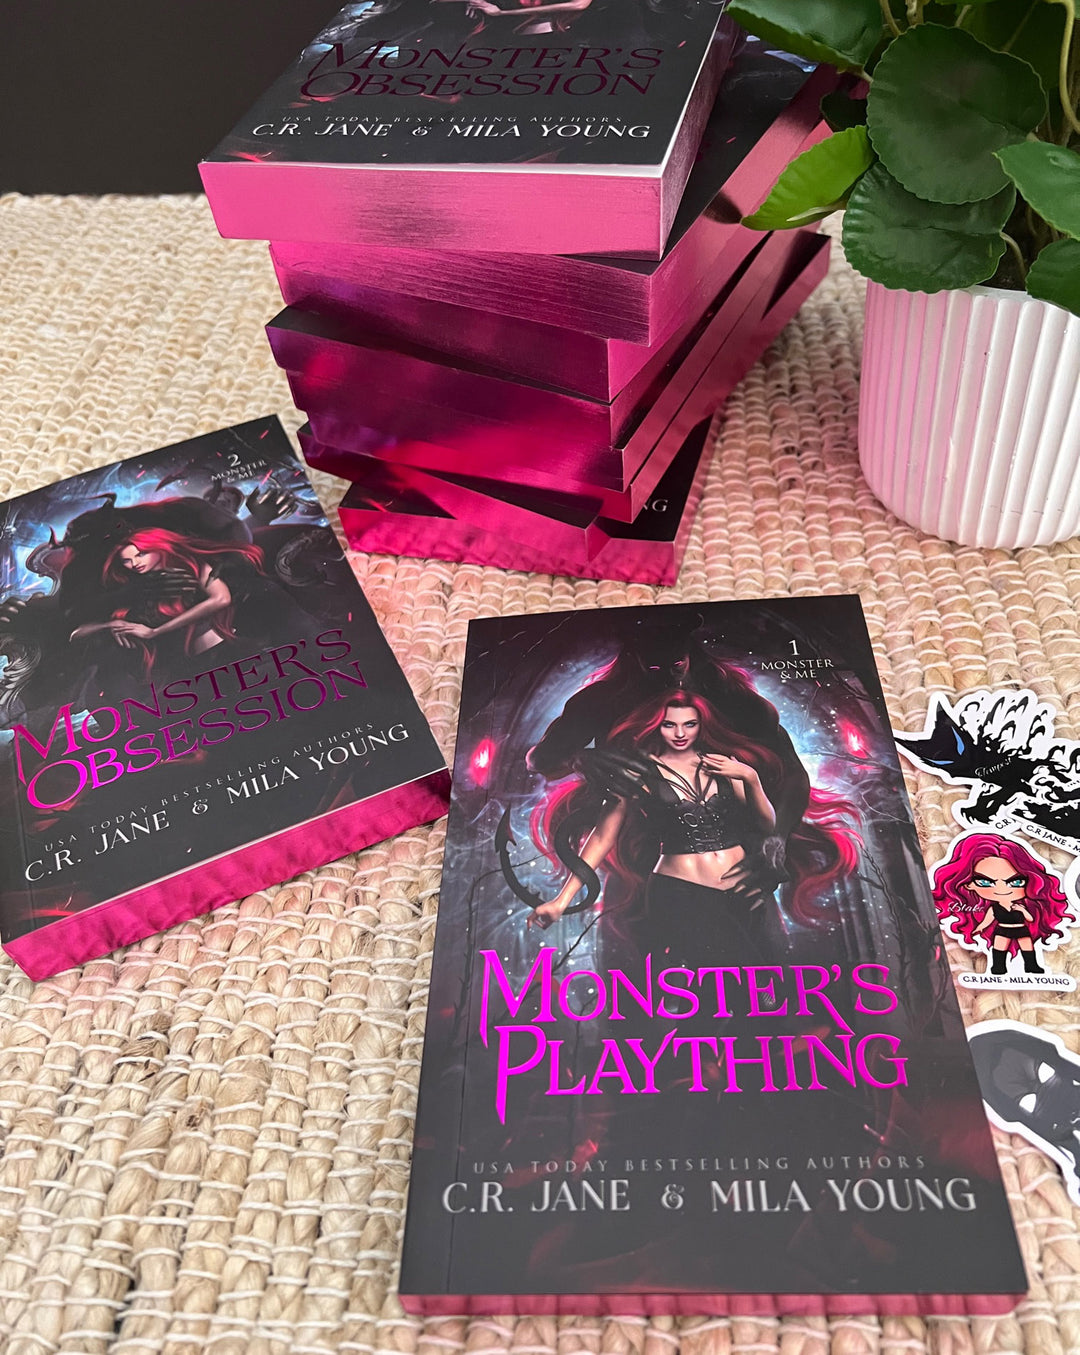 Monster's Plaything - Édition spéciale Pink Foil